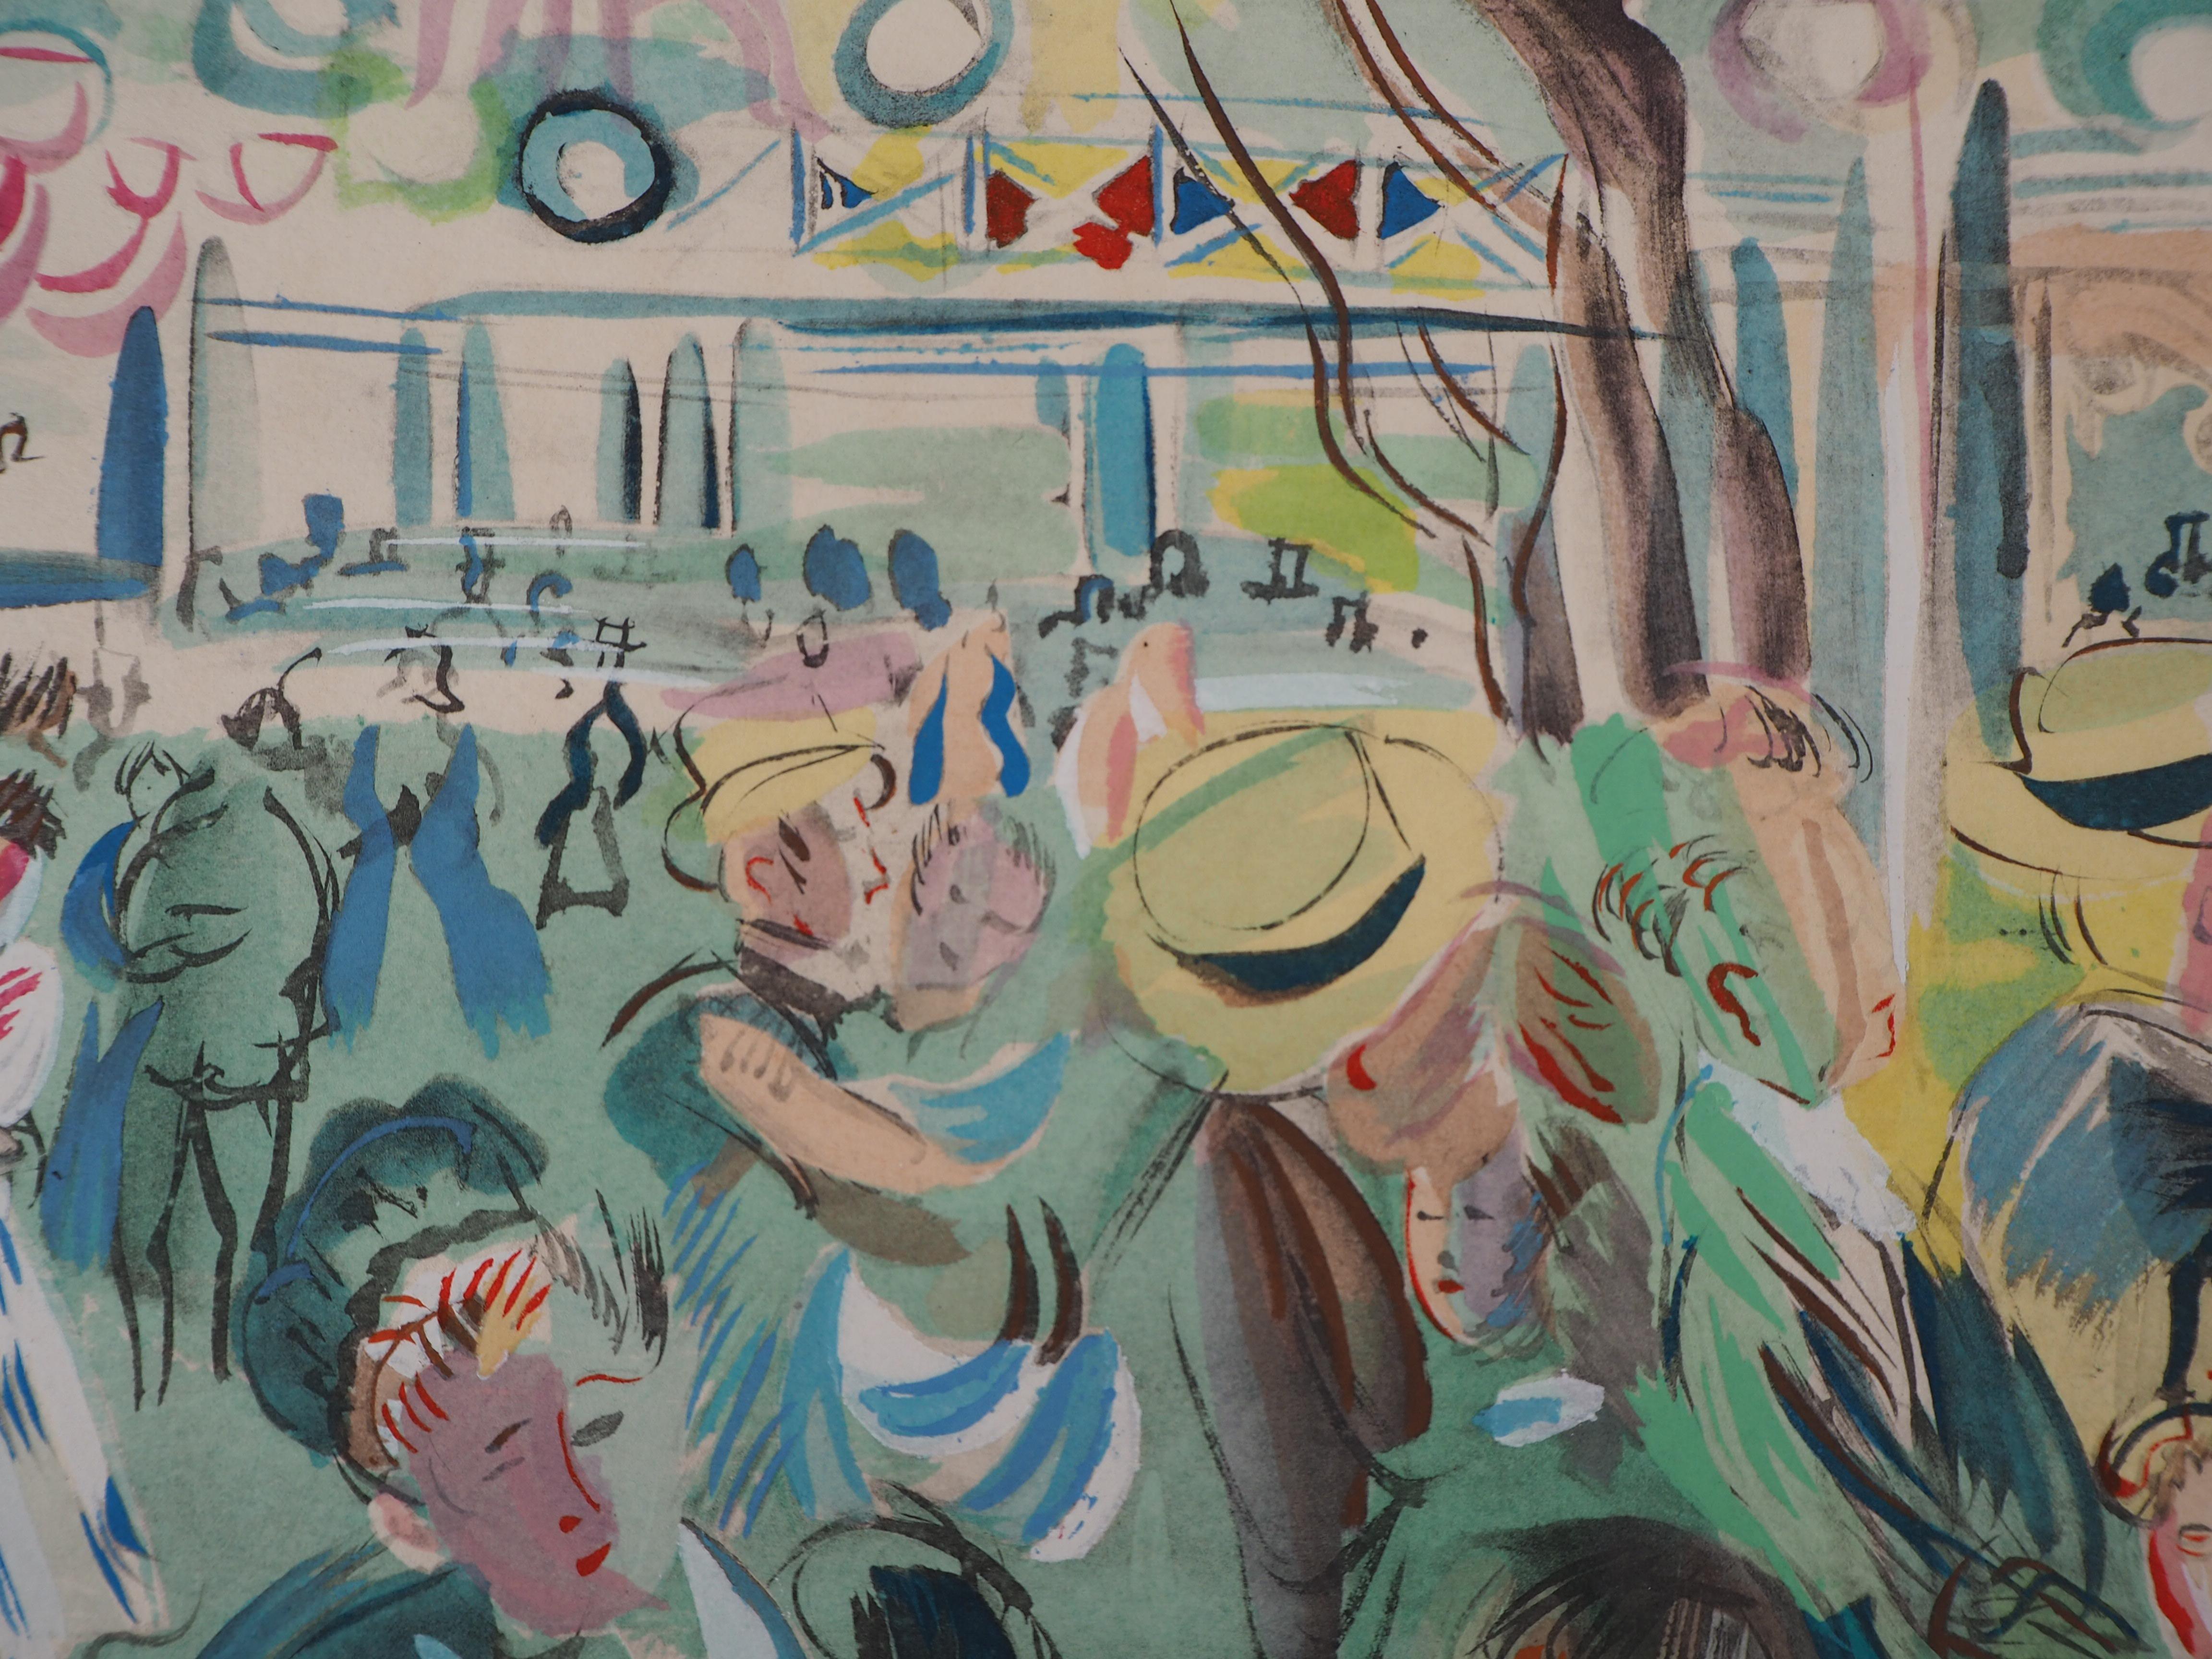 Tribute to Renoir : Dancing Cafe - Original Lithograph - Modern Print by Raoul Dufy